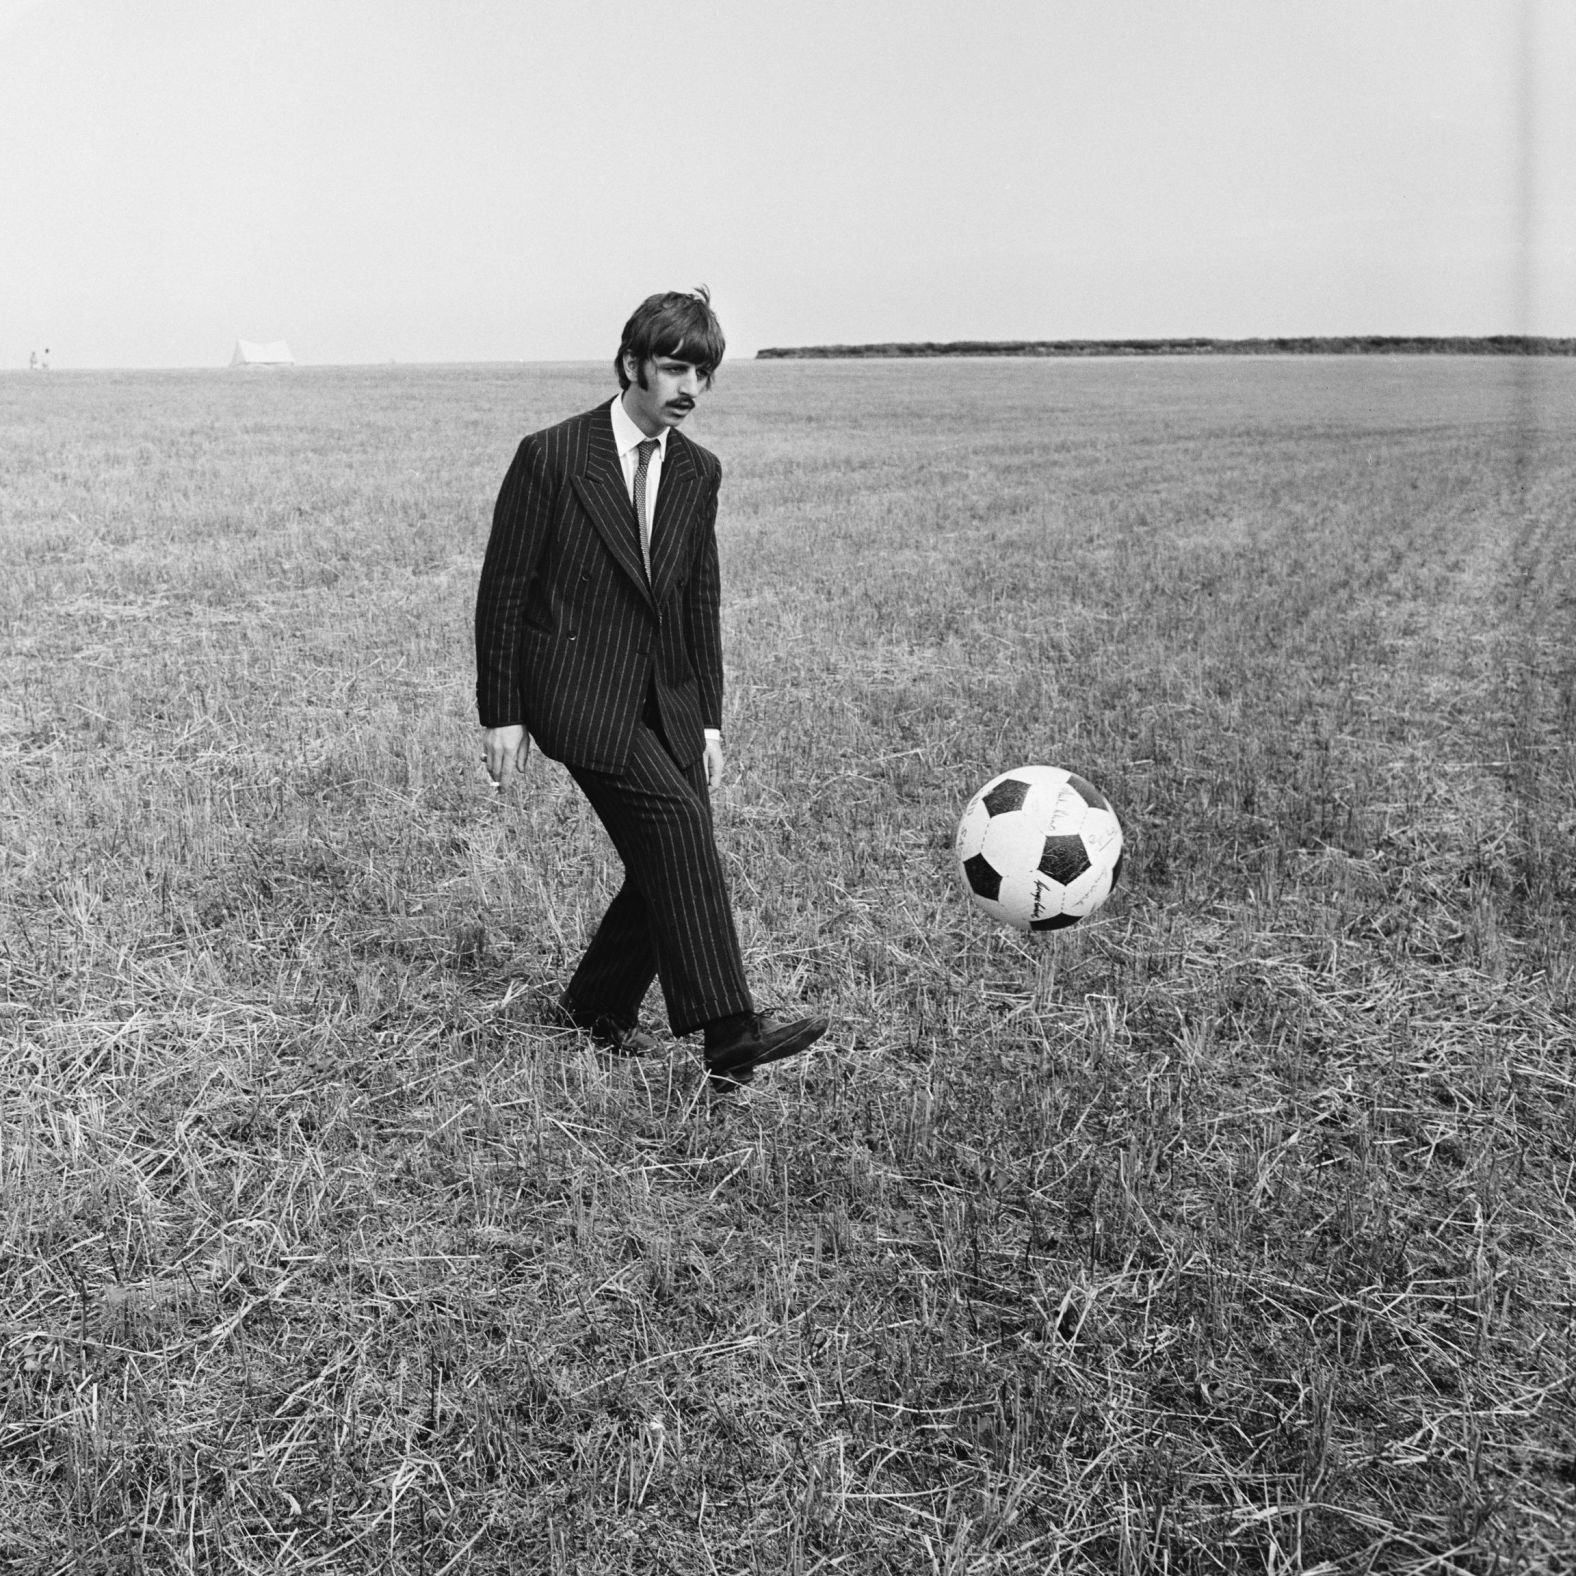 Starr kicks a ball while filming the Beatles' musical "Magical Mystery Tour" in September 1967.